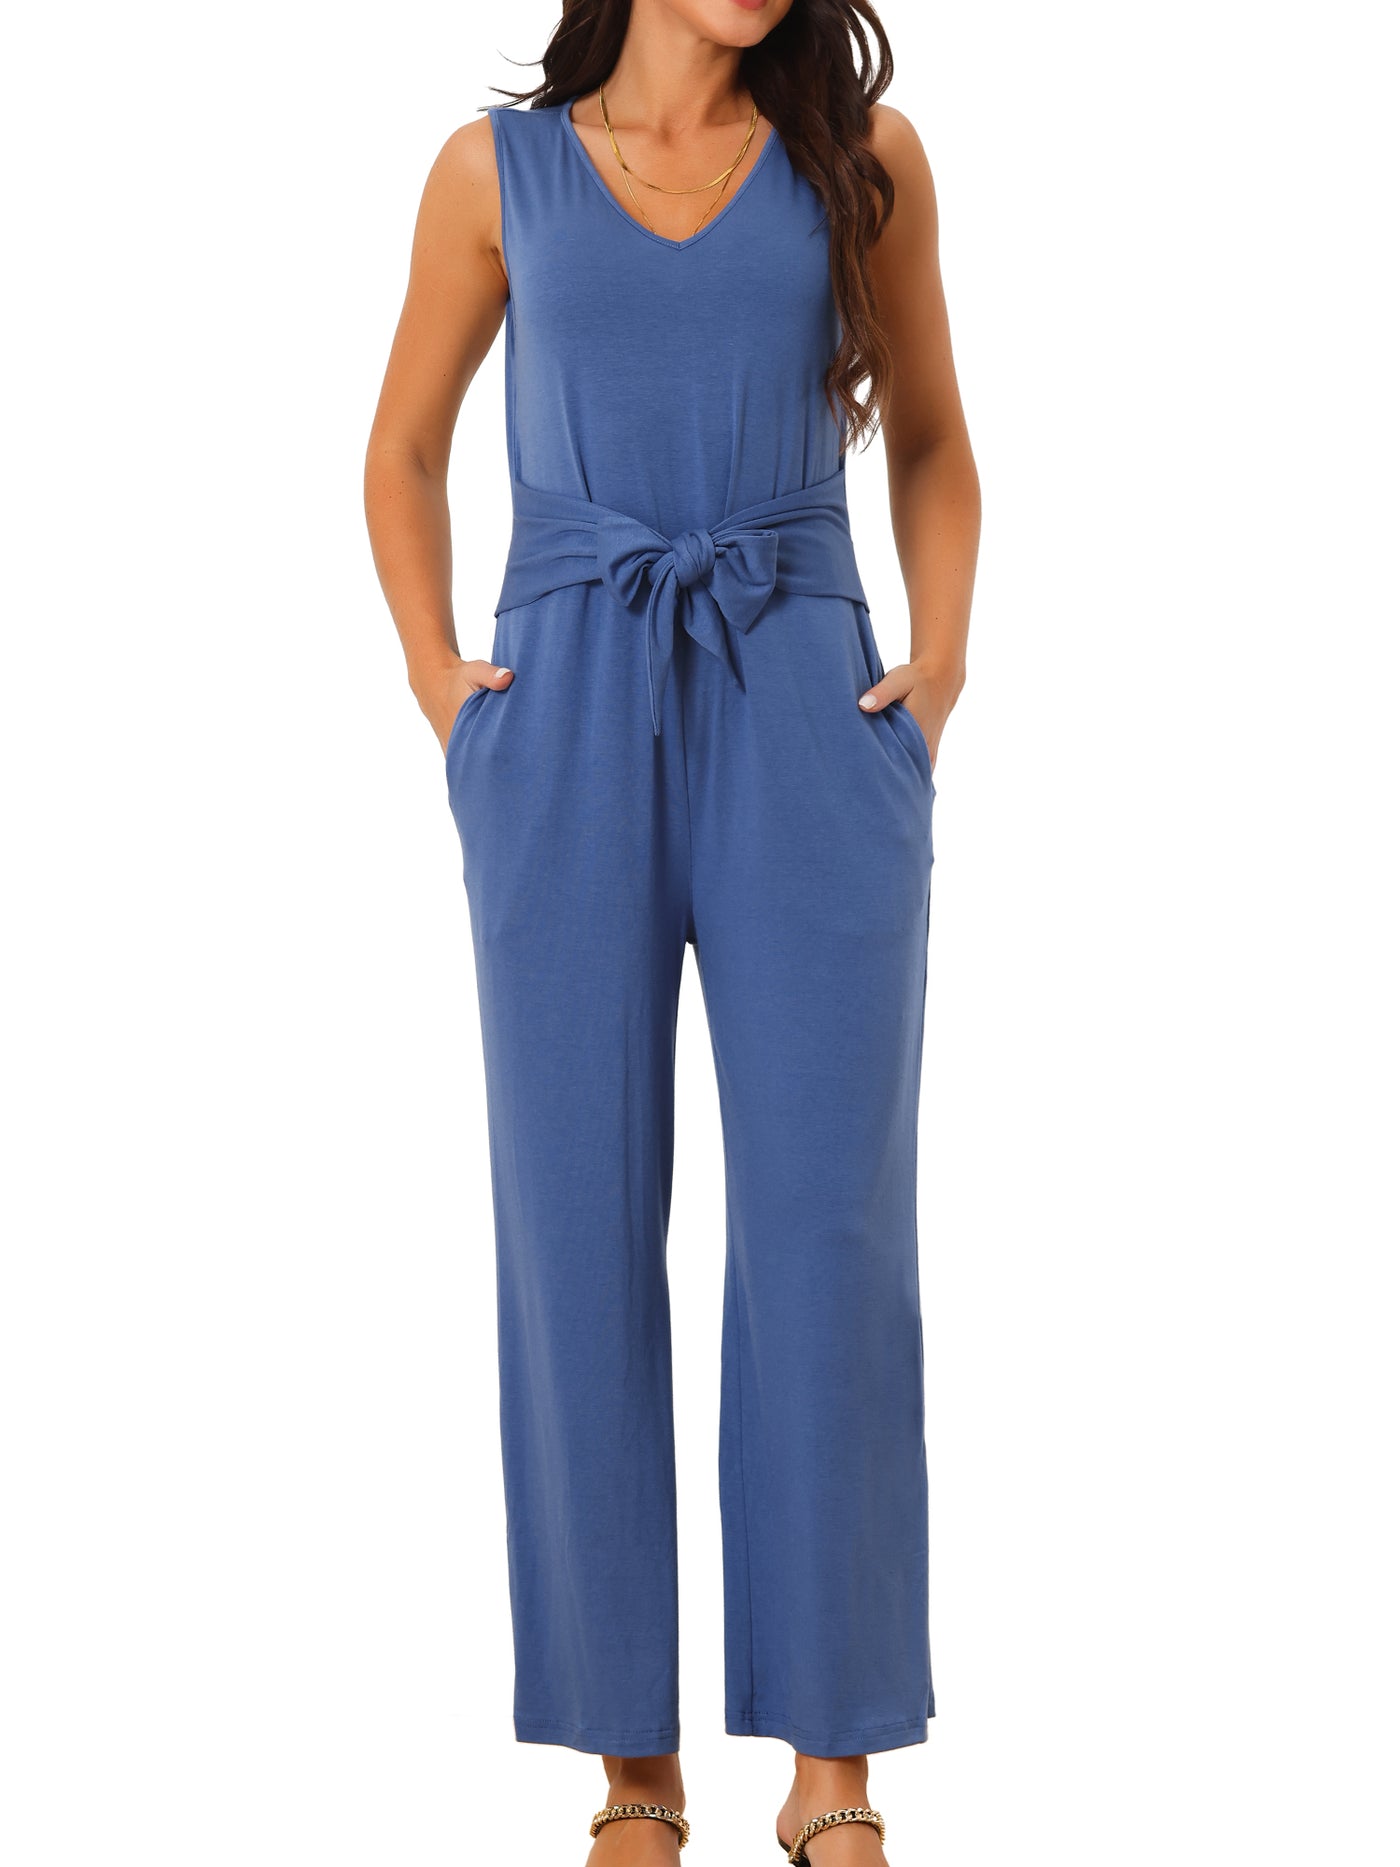 Bublédon Sleeveless Tie Waist Stretchy Wide Legs Jumpsuits with Pockets